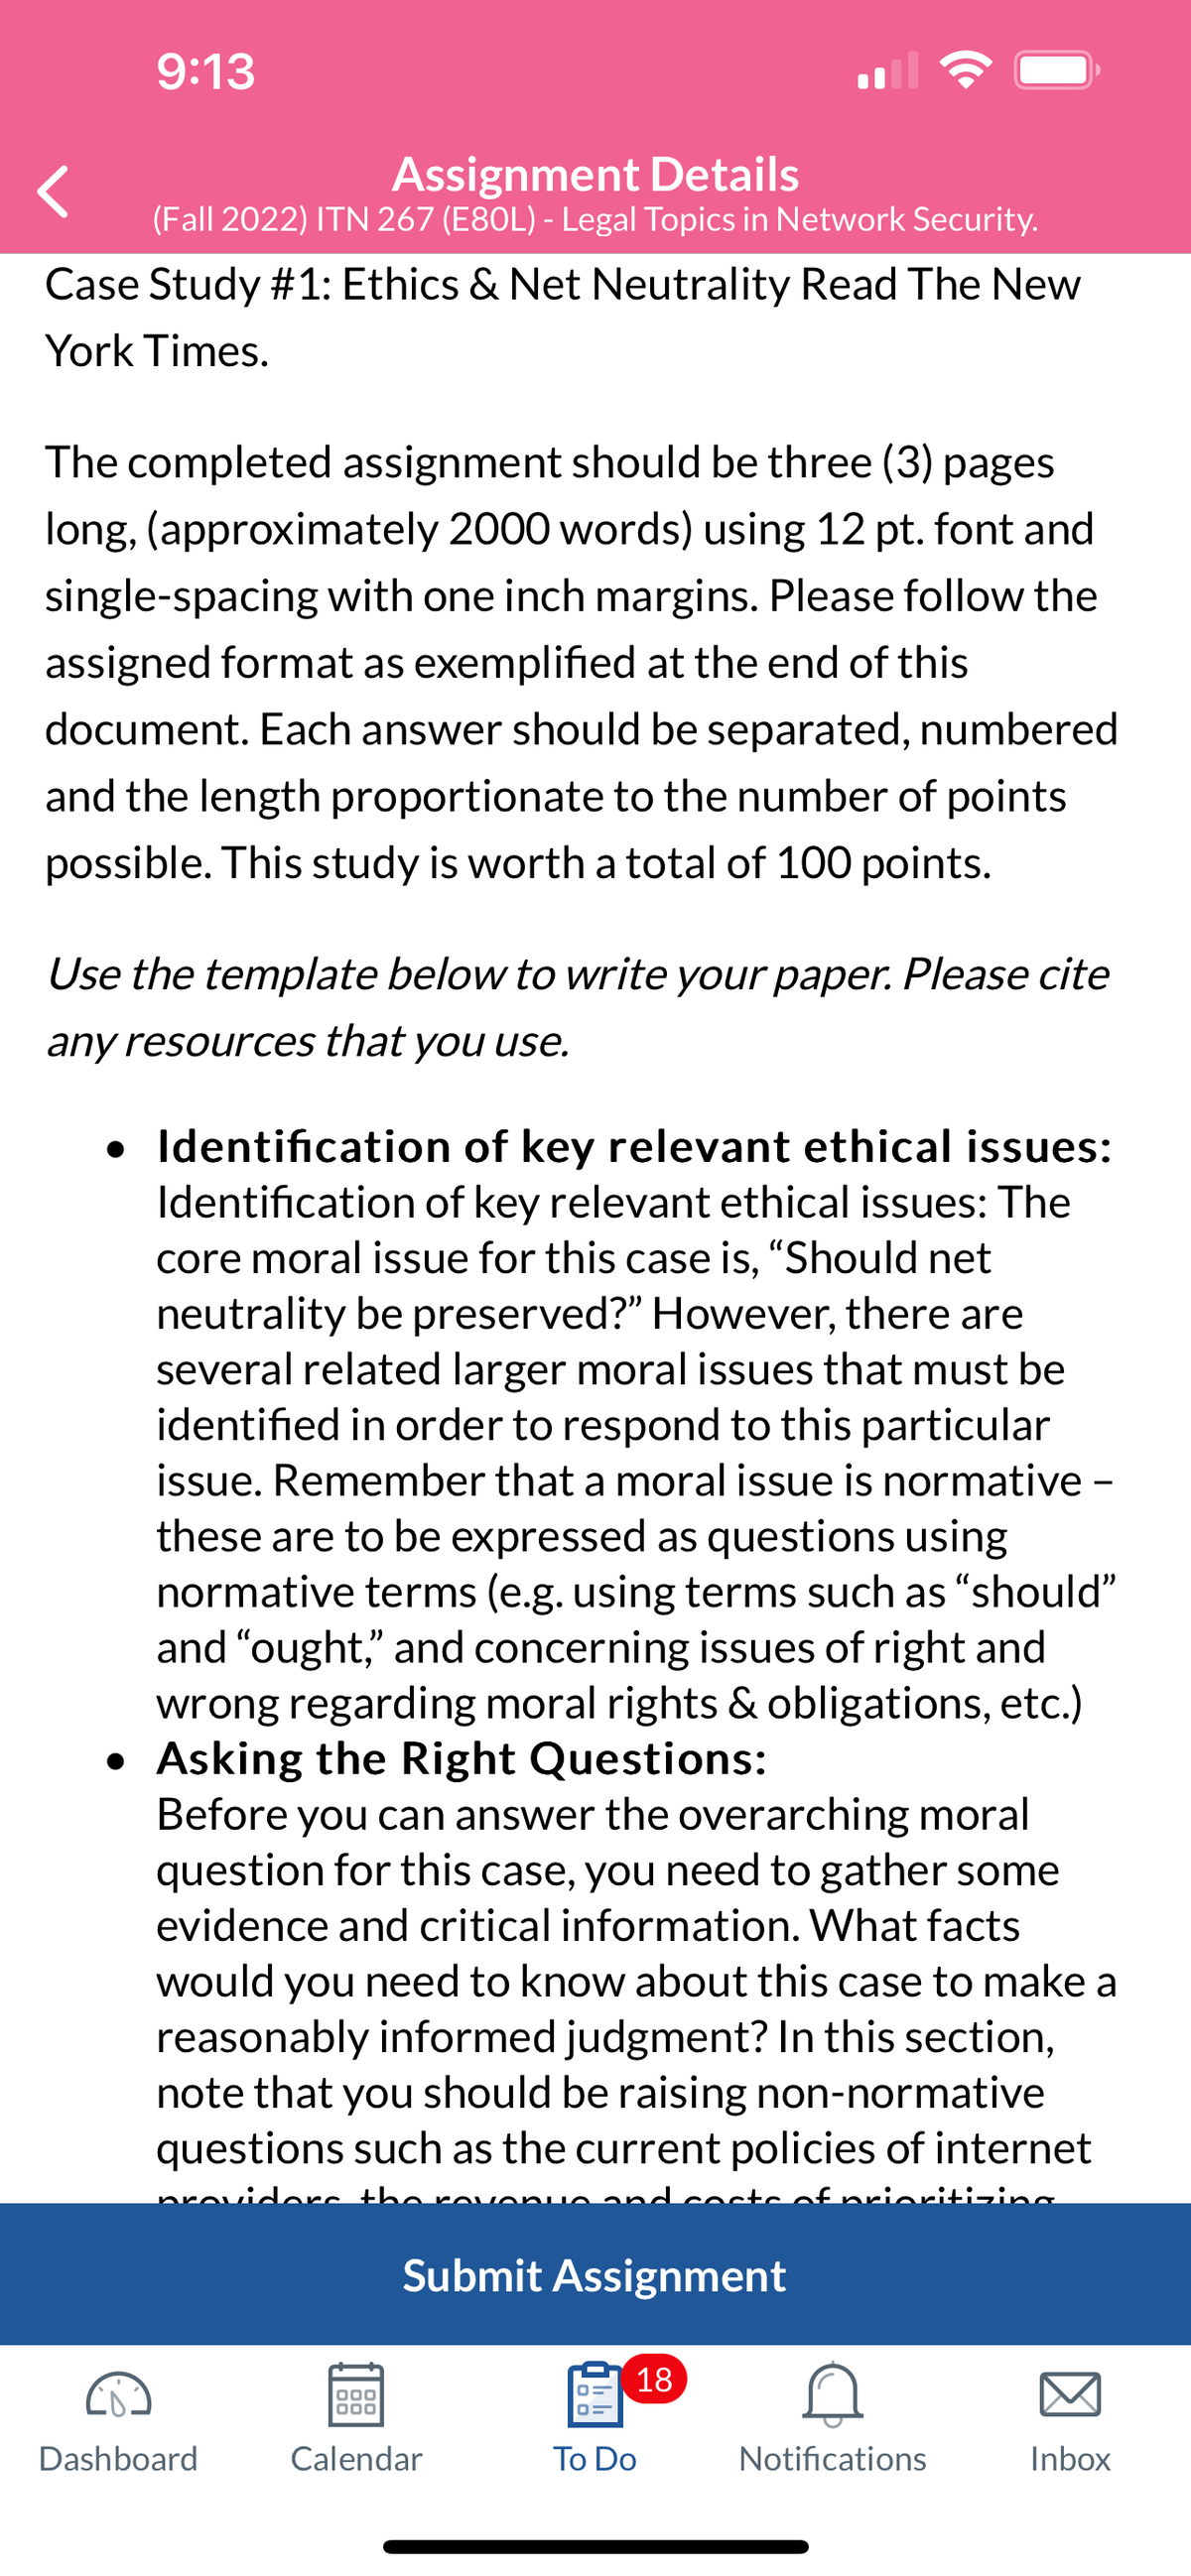 9:13
Assignment Details
(Fall 2022) ITN 267 (E80L) - Legal Topics in Network Security.
Case Study #1: Ethics & Net Neutrality Read The New
York Times.
The completed assignment should be three (3) pages
long, (approximately 2000 words) using 12 pt. font and
single-spacing with one inch margins. Please follow the
assigned format as exemplified at the end of this
document. Each answer should be separated, numbered
and the length proportionate to the number of points
possible. This study is worth a total of 100 points.
Use the template below to write your paper. Please cite
any resources that you use.
•
Identification of key relevant ethical issues:
Identification of key relevant ethical issues: The
core moral issue for this case is, "Should net
neutrality be preserved?" However, there are
several related larger moral issues that must be
identified in order to respond to this particular
issue. Remember that a moral issue is normative -
these are to be expressed as questions using
normative terms (e.g. using terms such as "should"
and "ought," and concerning issues of right and
wrong regarding moral rights & obligations, etc.)
• Asking the Right Questions:
Before you can answer the overarching moral
question for this case, you need to gather some
evidence and critical information. What facts
would you need to know about this case to make a
reasonably informed judgment? In this section,
note that you should be raising non-normative
questions such as the current policies of internet
viders the
and costs of prioritizing
Dashboard
Submit Assignment
000
000
Calendar
18
To Do
Notifications
Inbox